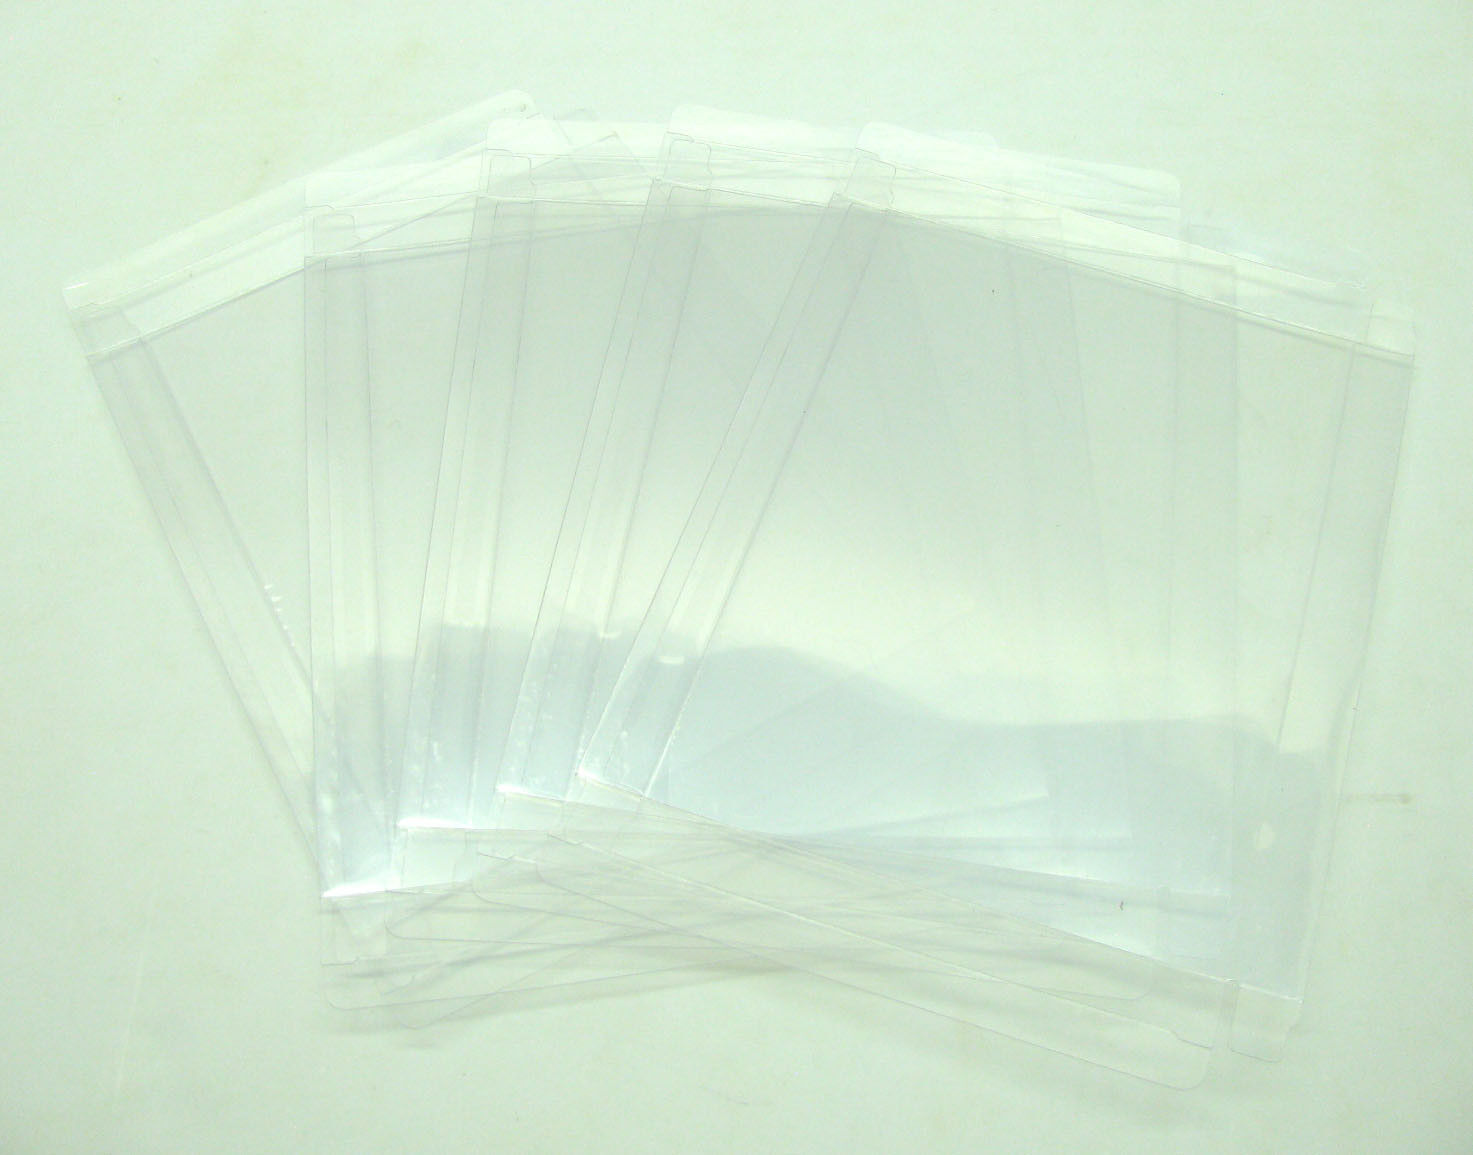 50x BLU-RAY STEELBOOK CLEAR PROTECTIVE BOX PROTECTORS - FREE SHIPPING! Dr. Retro Does Not Apply - фотография #6